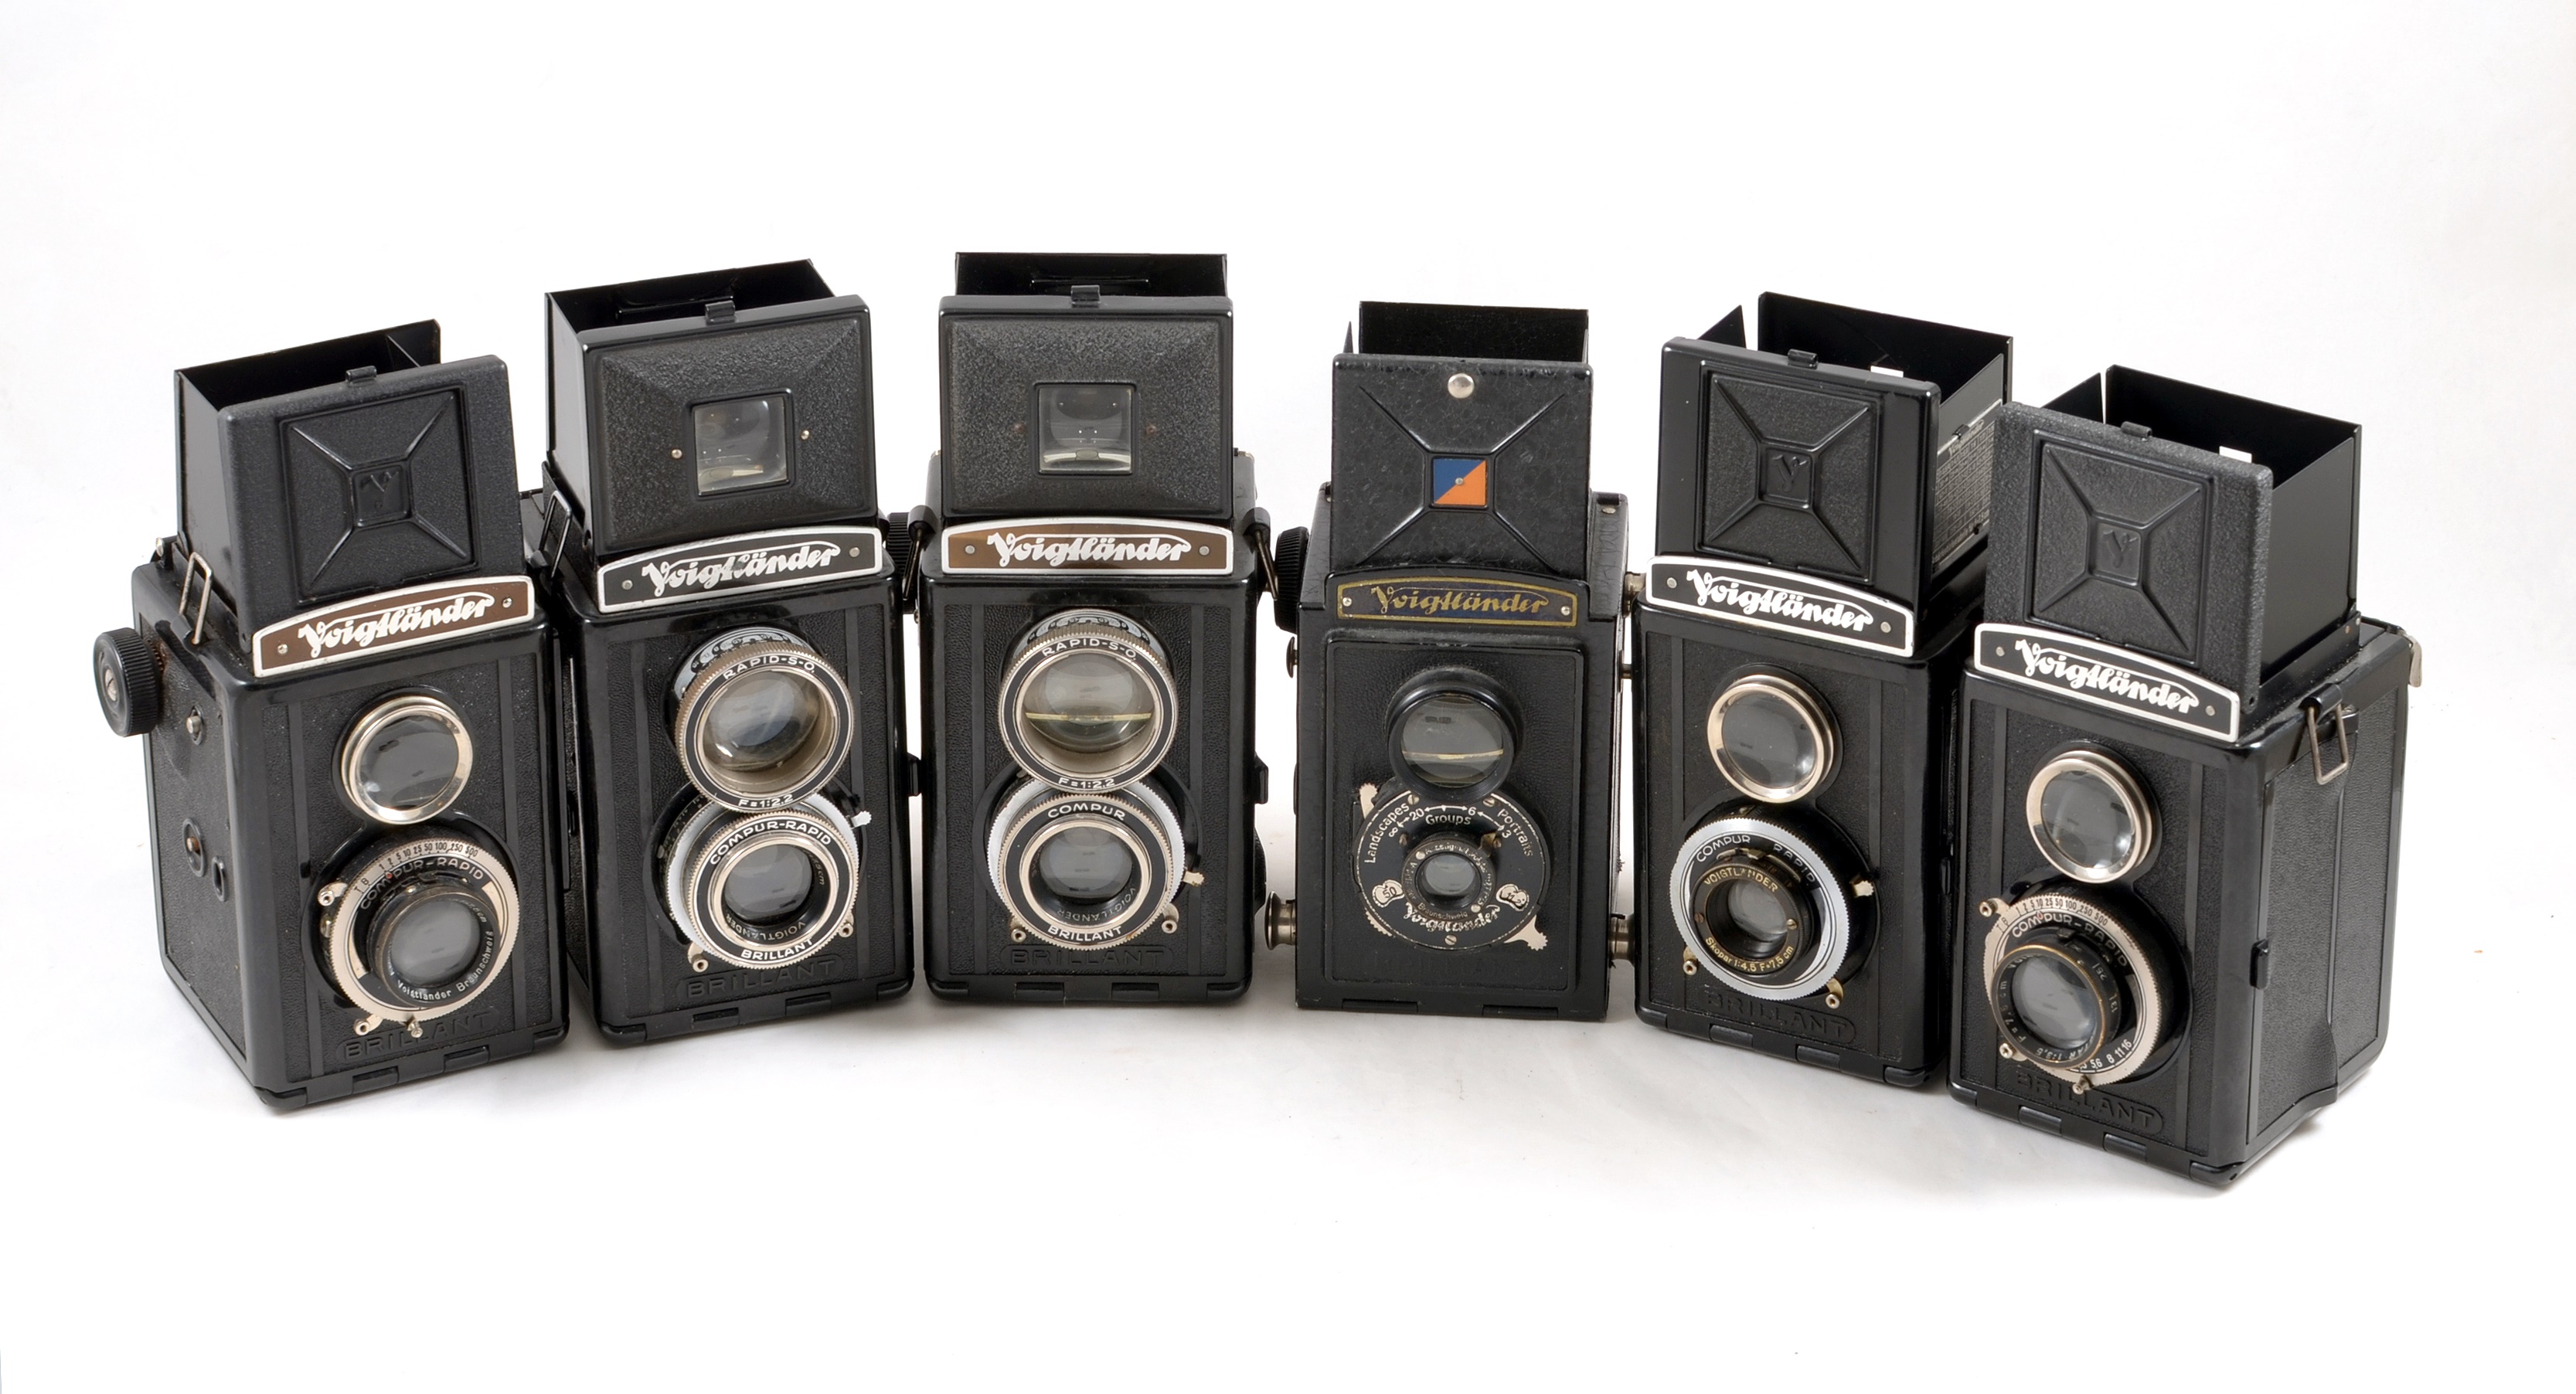 A Group of Six Voigtlander Brilliant 120 TLRs. - Image 2 of 2